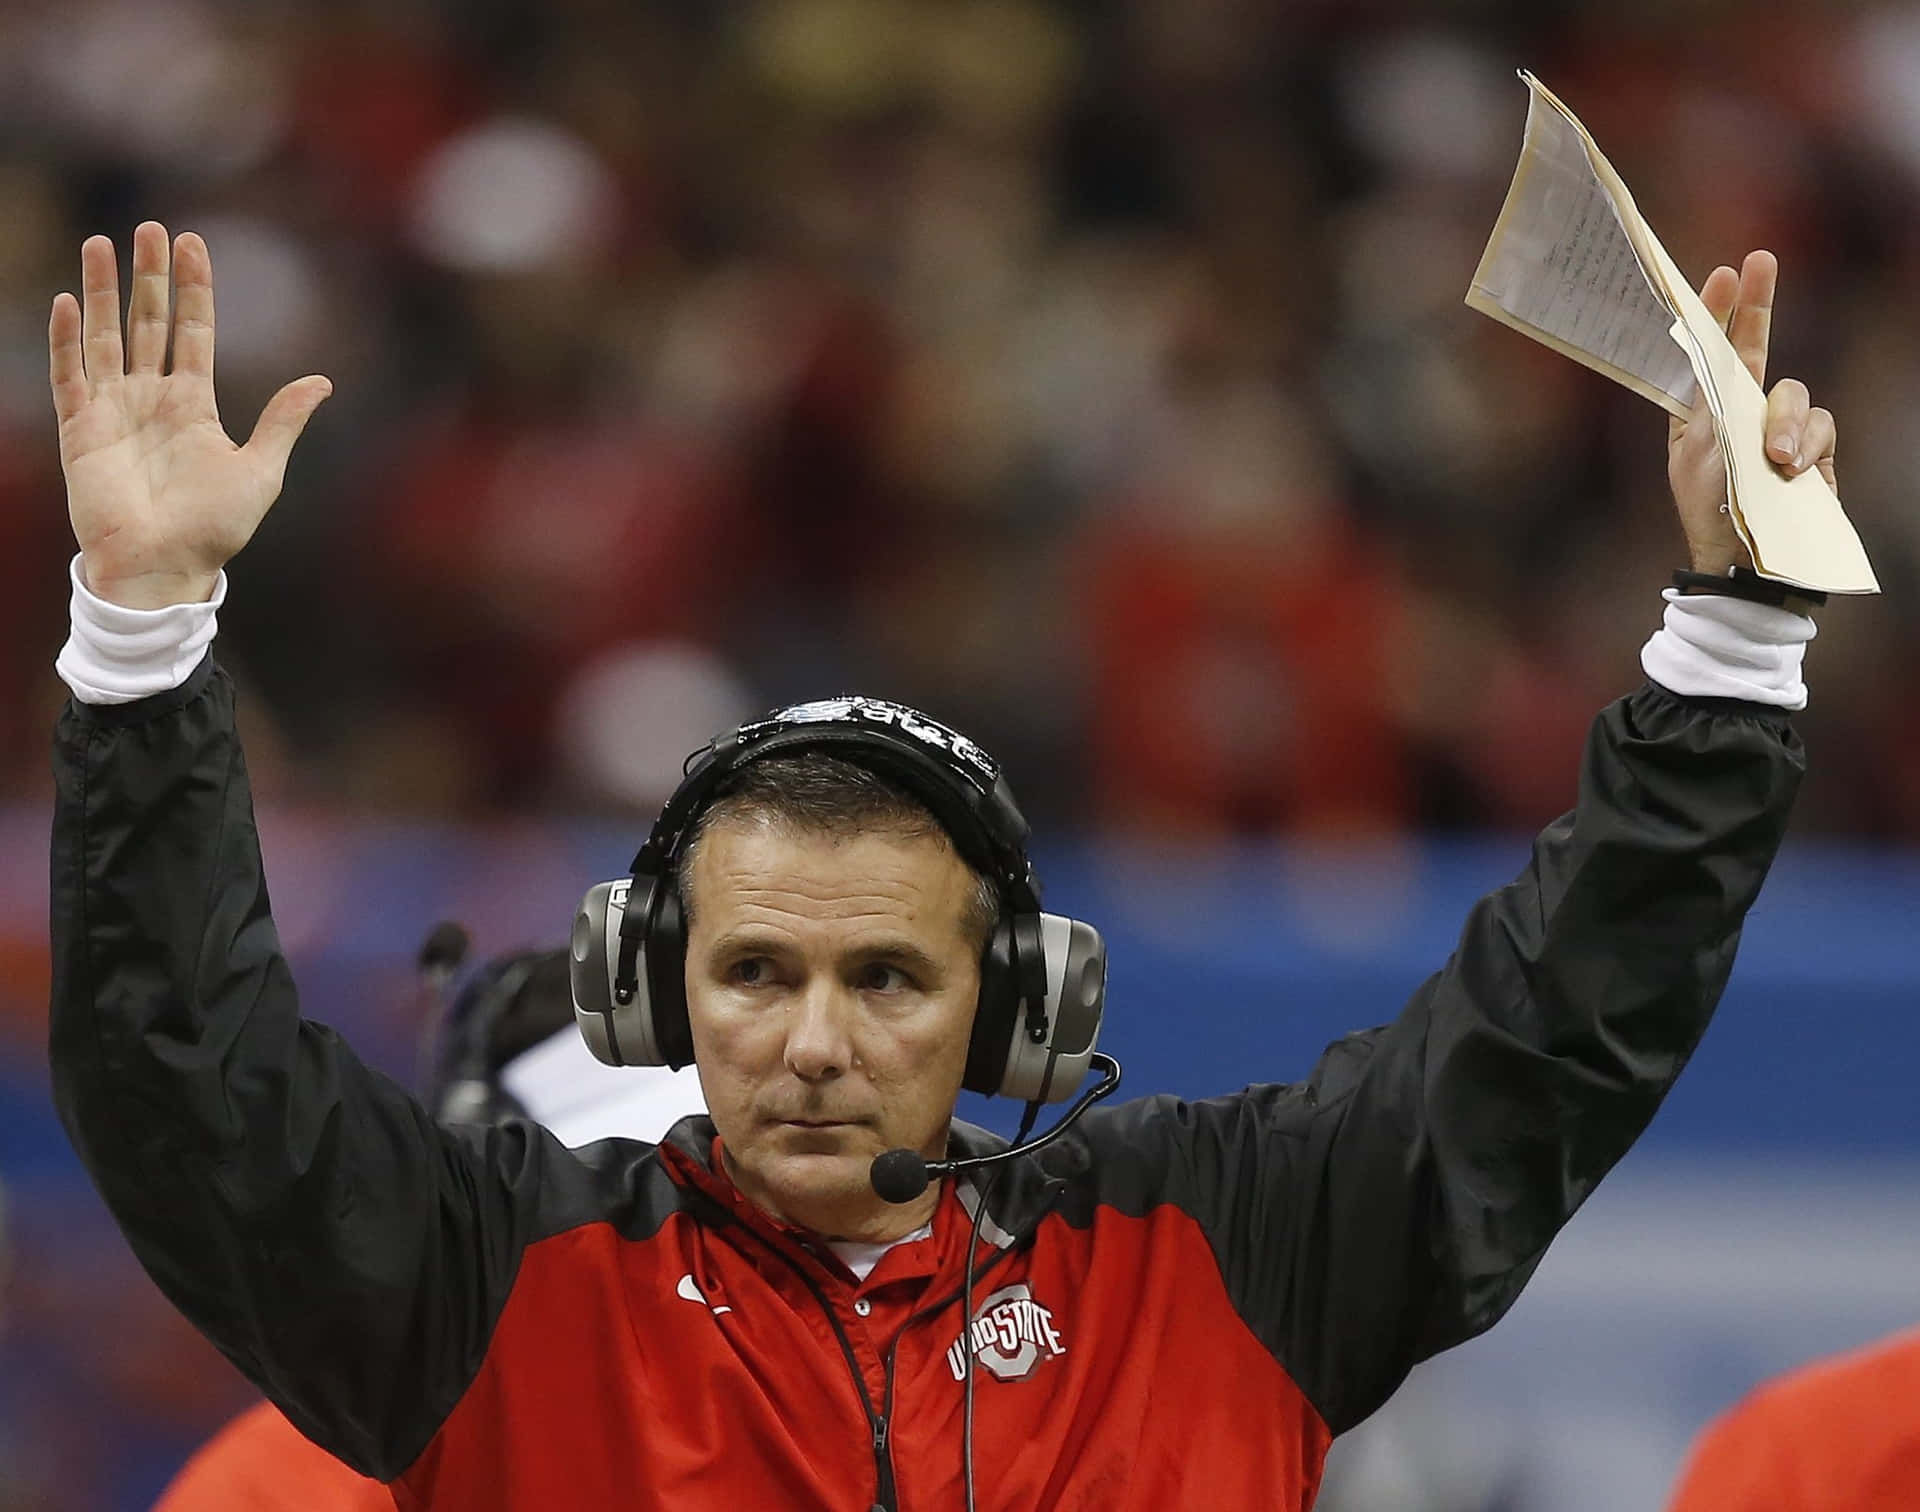 Ohio State football head coach Urban Meyer in action